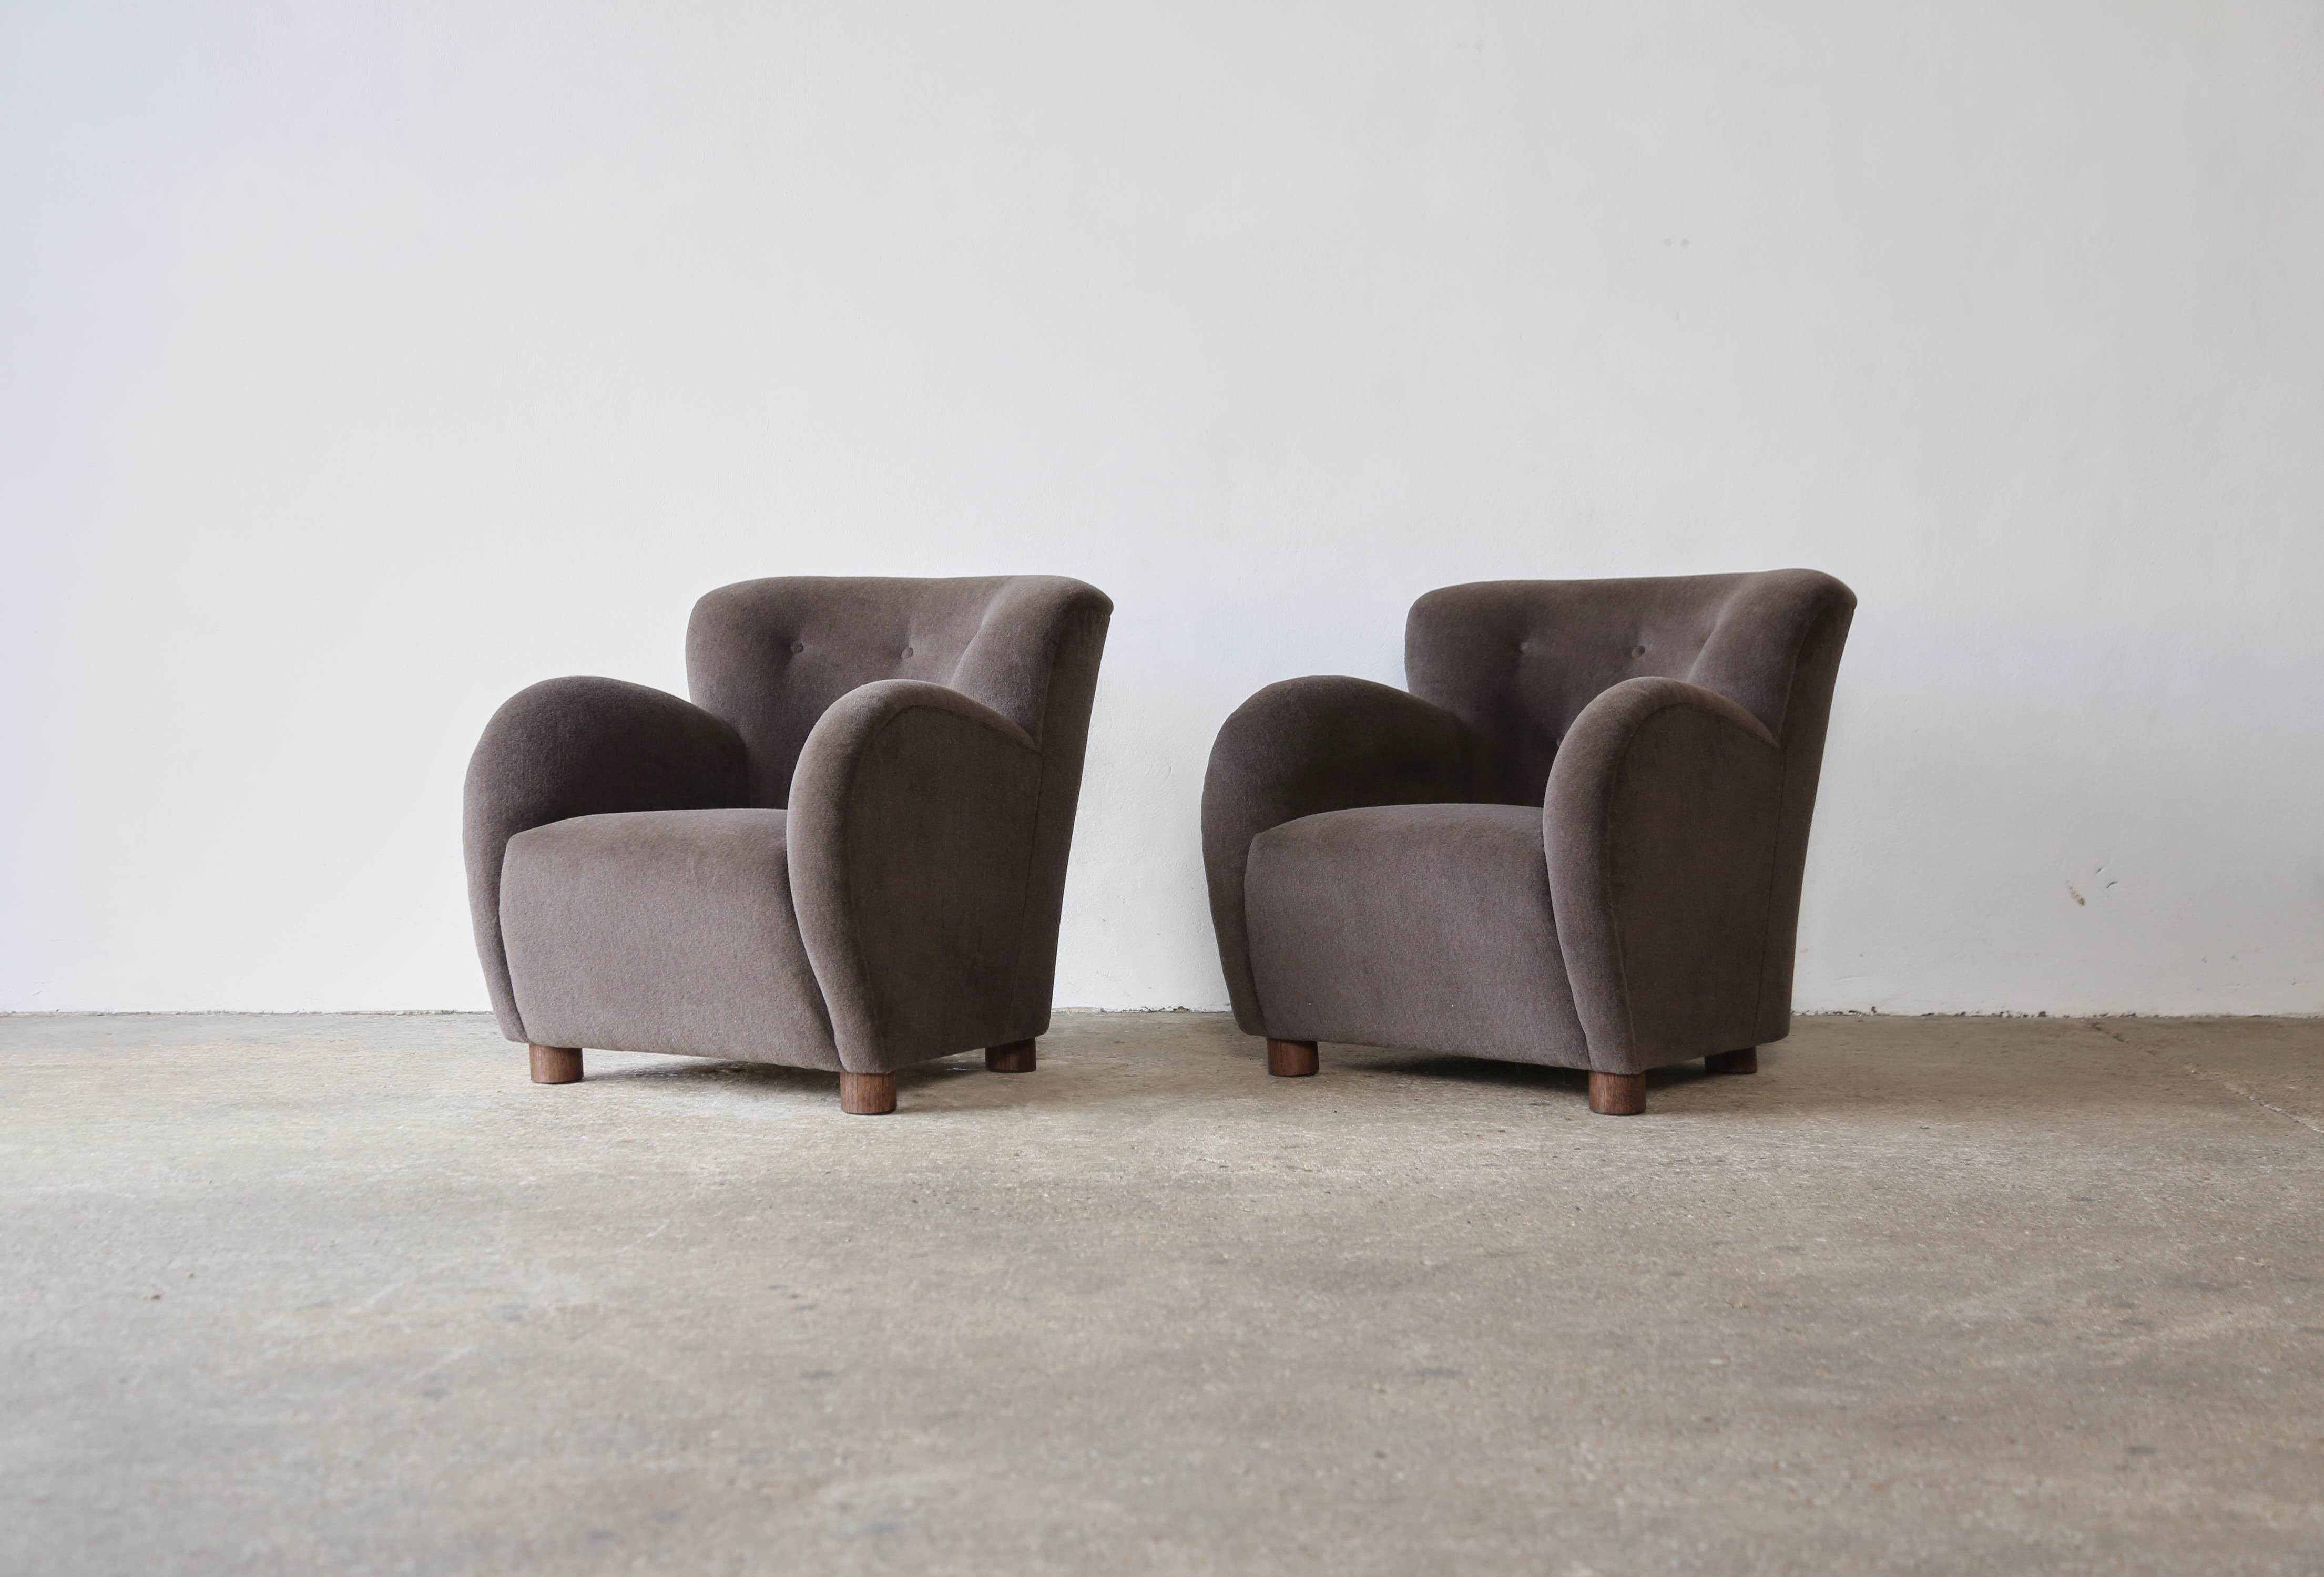 A superb pair of modern round arm Danish-style armchairs. Handmade beech frames, sprung seat and newly upholstered in a premium, soft, pure alpaca wool fabric with solid oak feet. Fast shipping worldwide.



